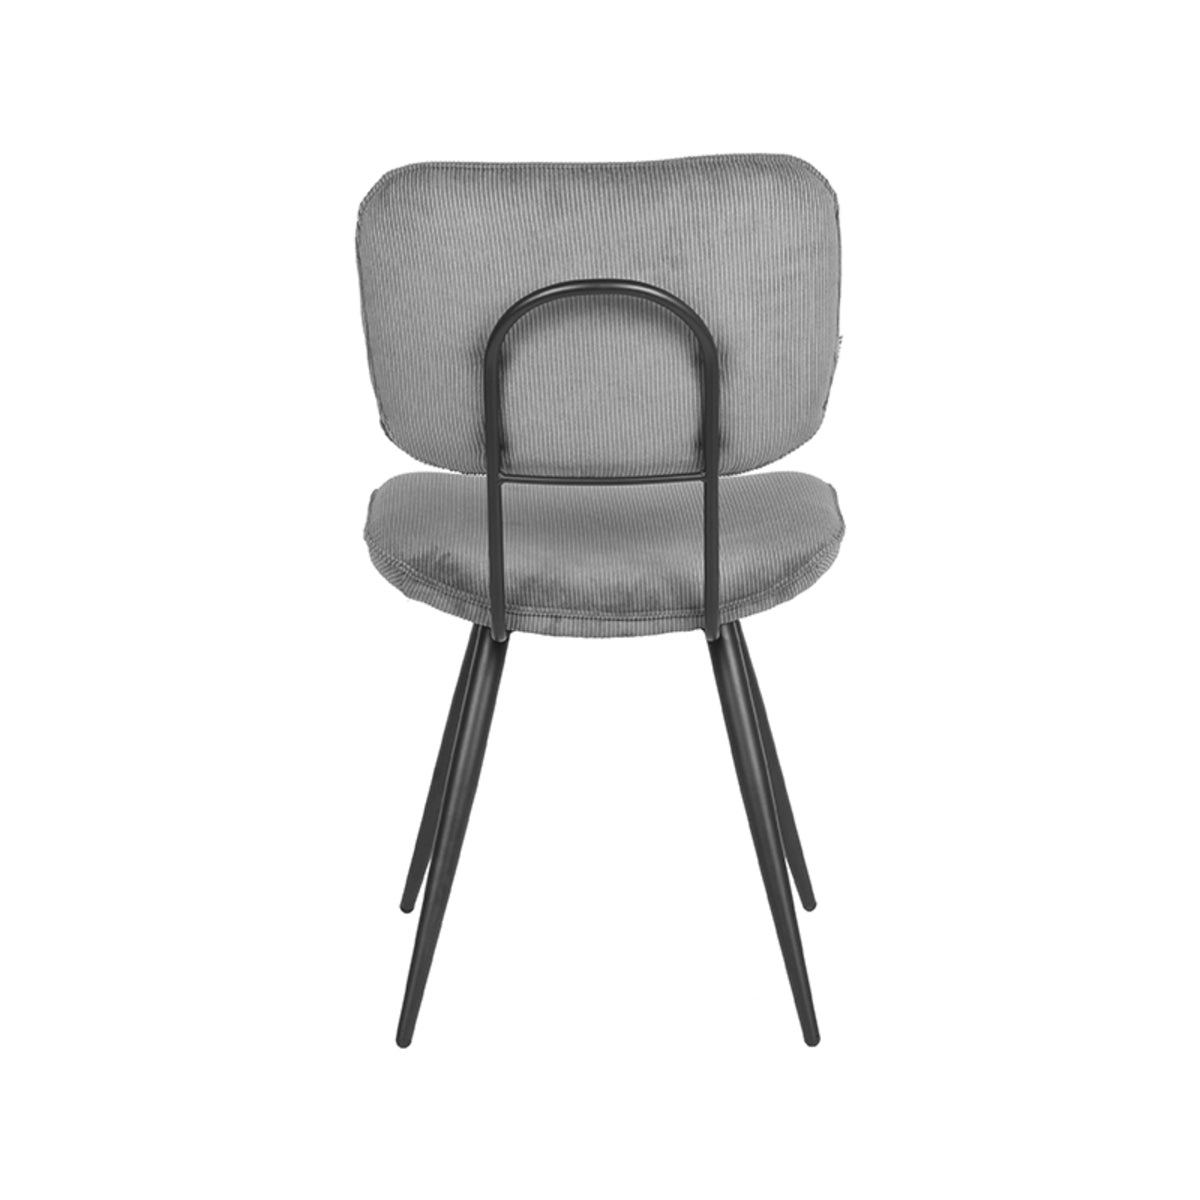 LABEL51 Dining room chair Vic - Dark gray - Ribcord | 2 pieces